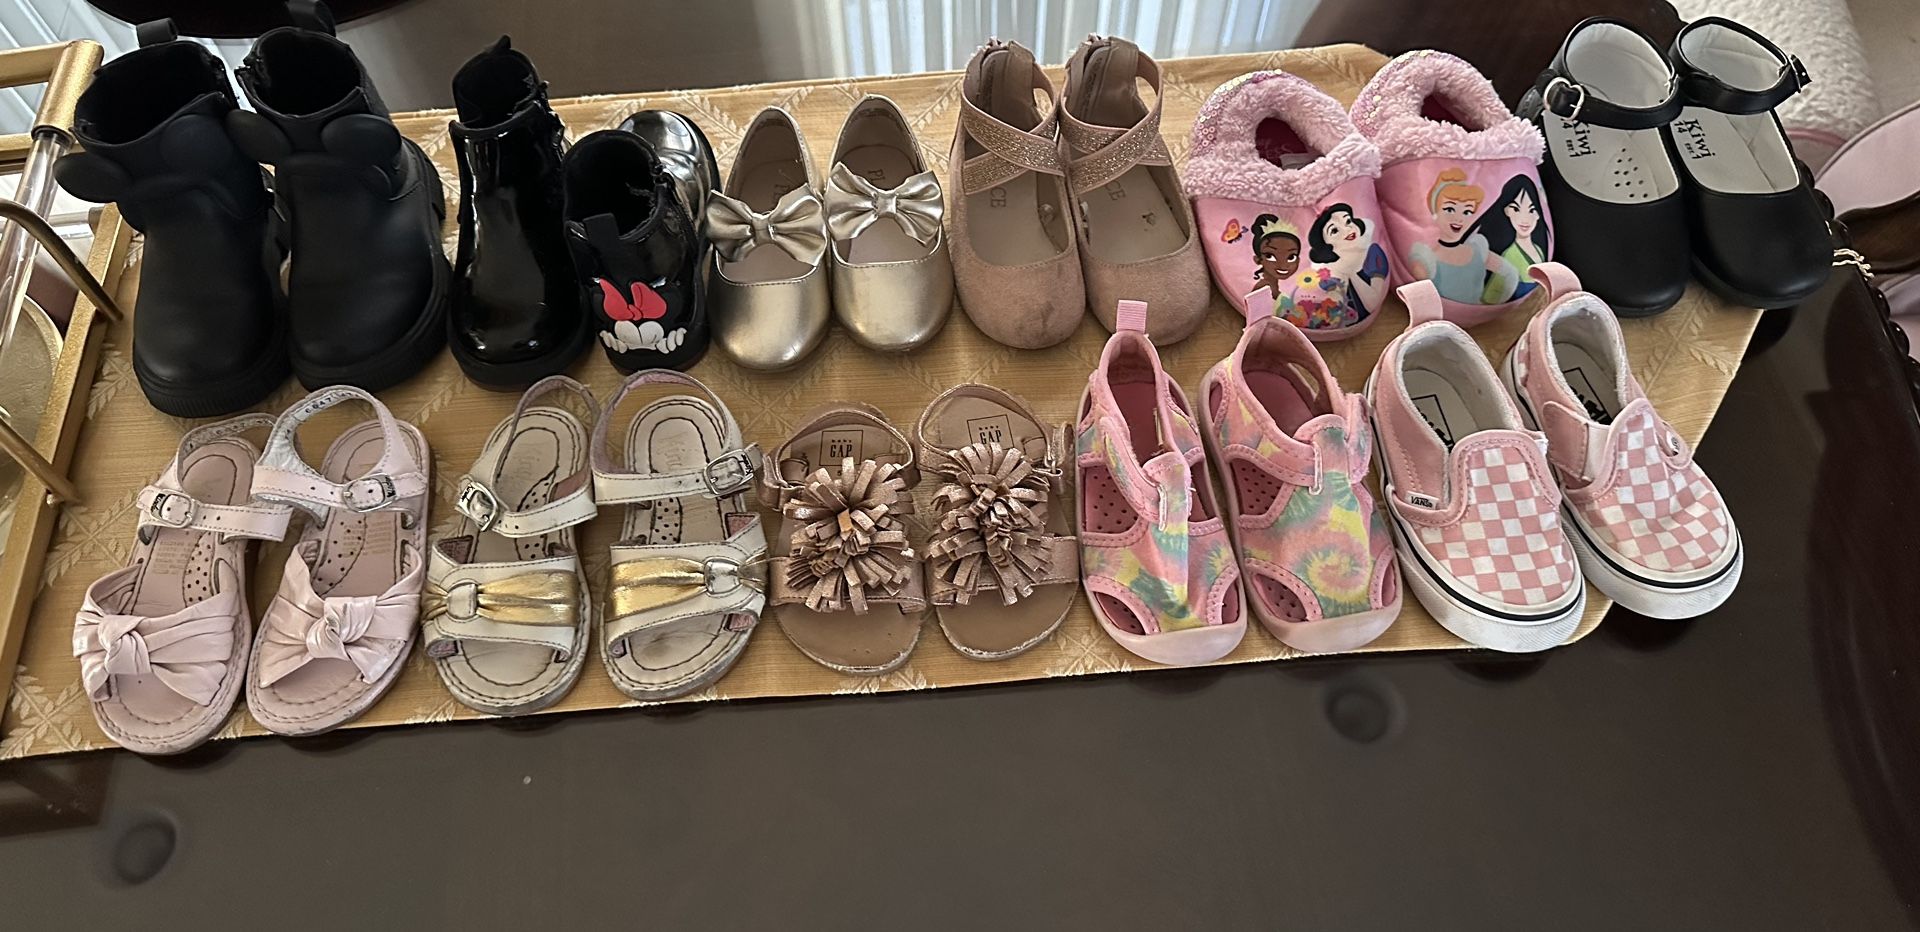 All toddler girl size 5 and 5.5 shoes.